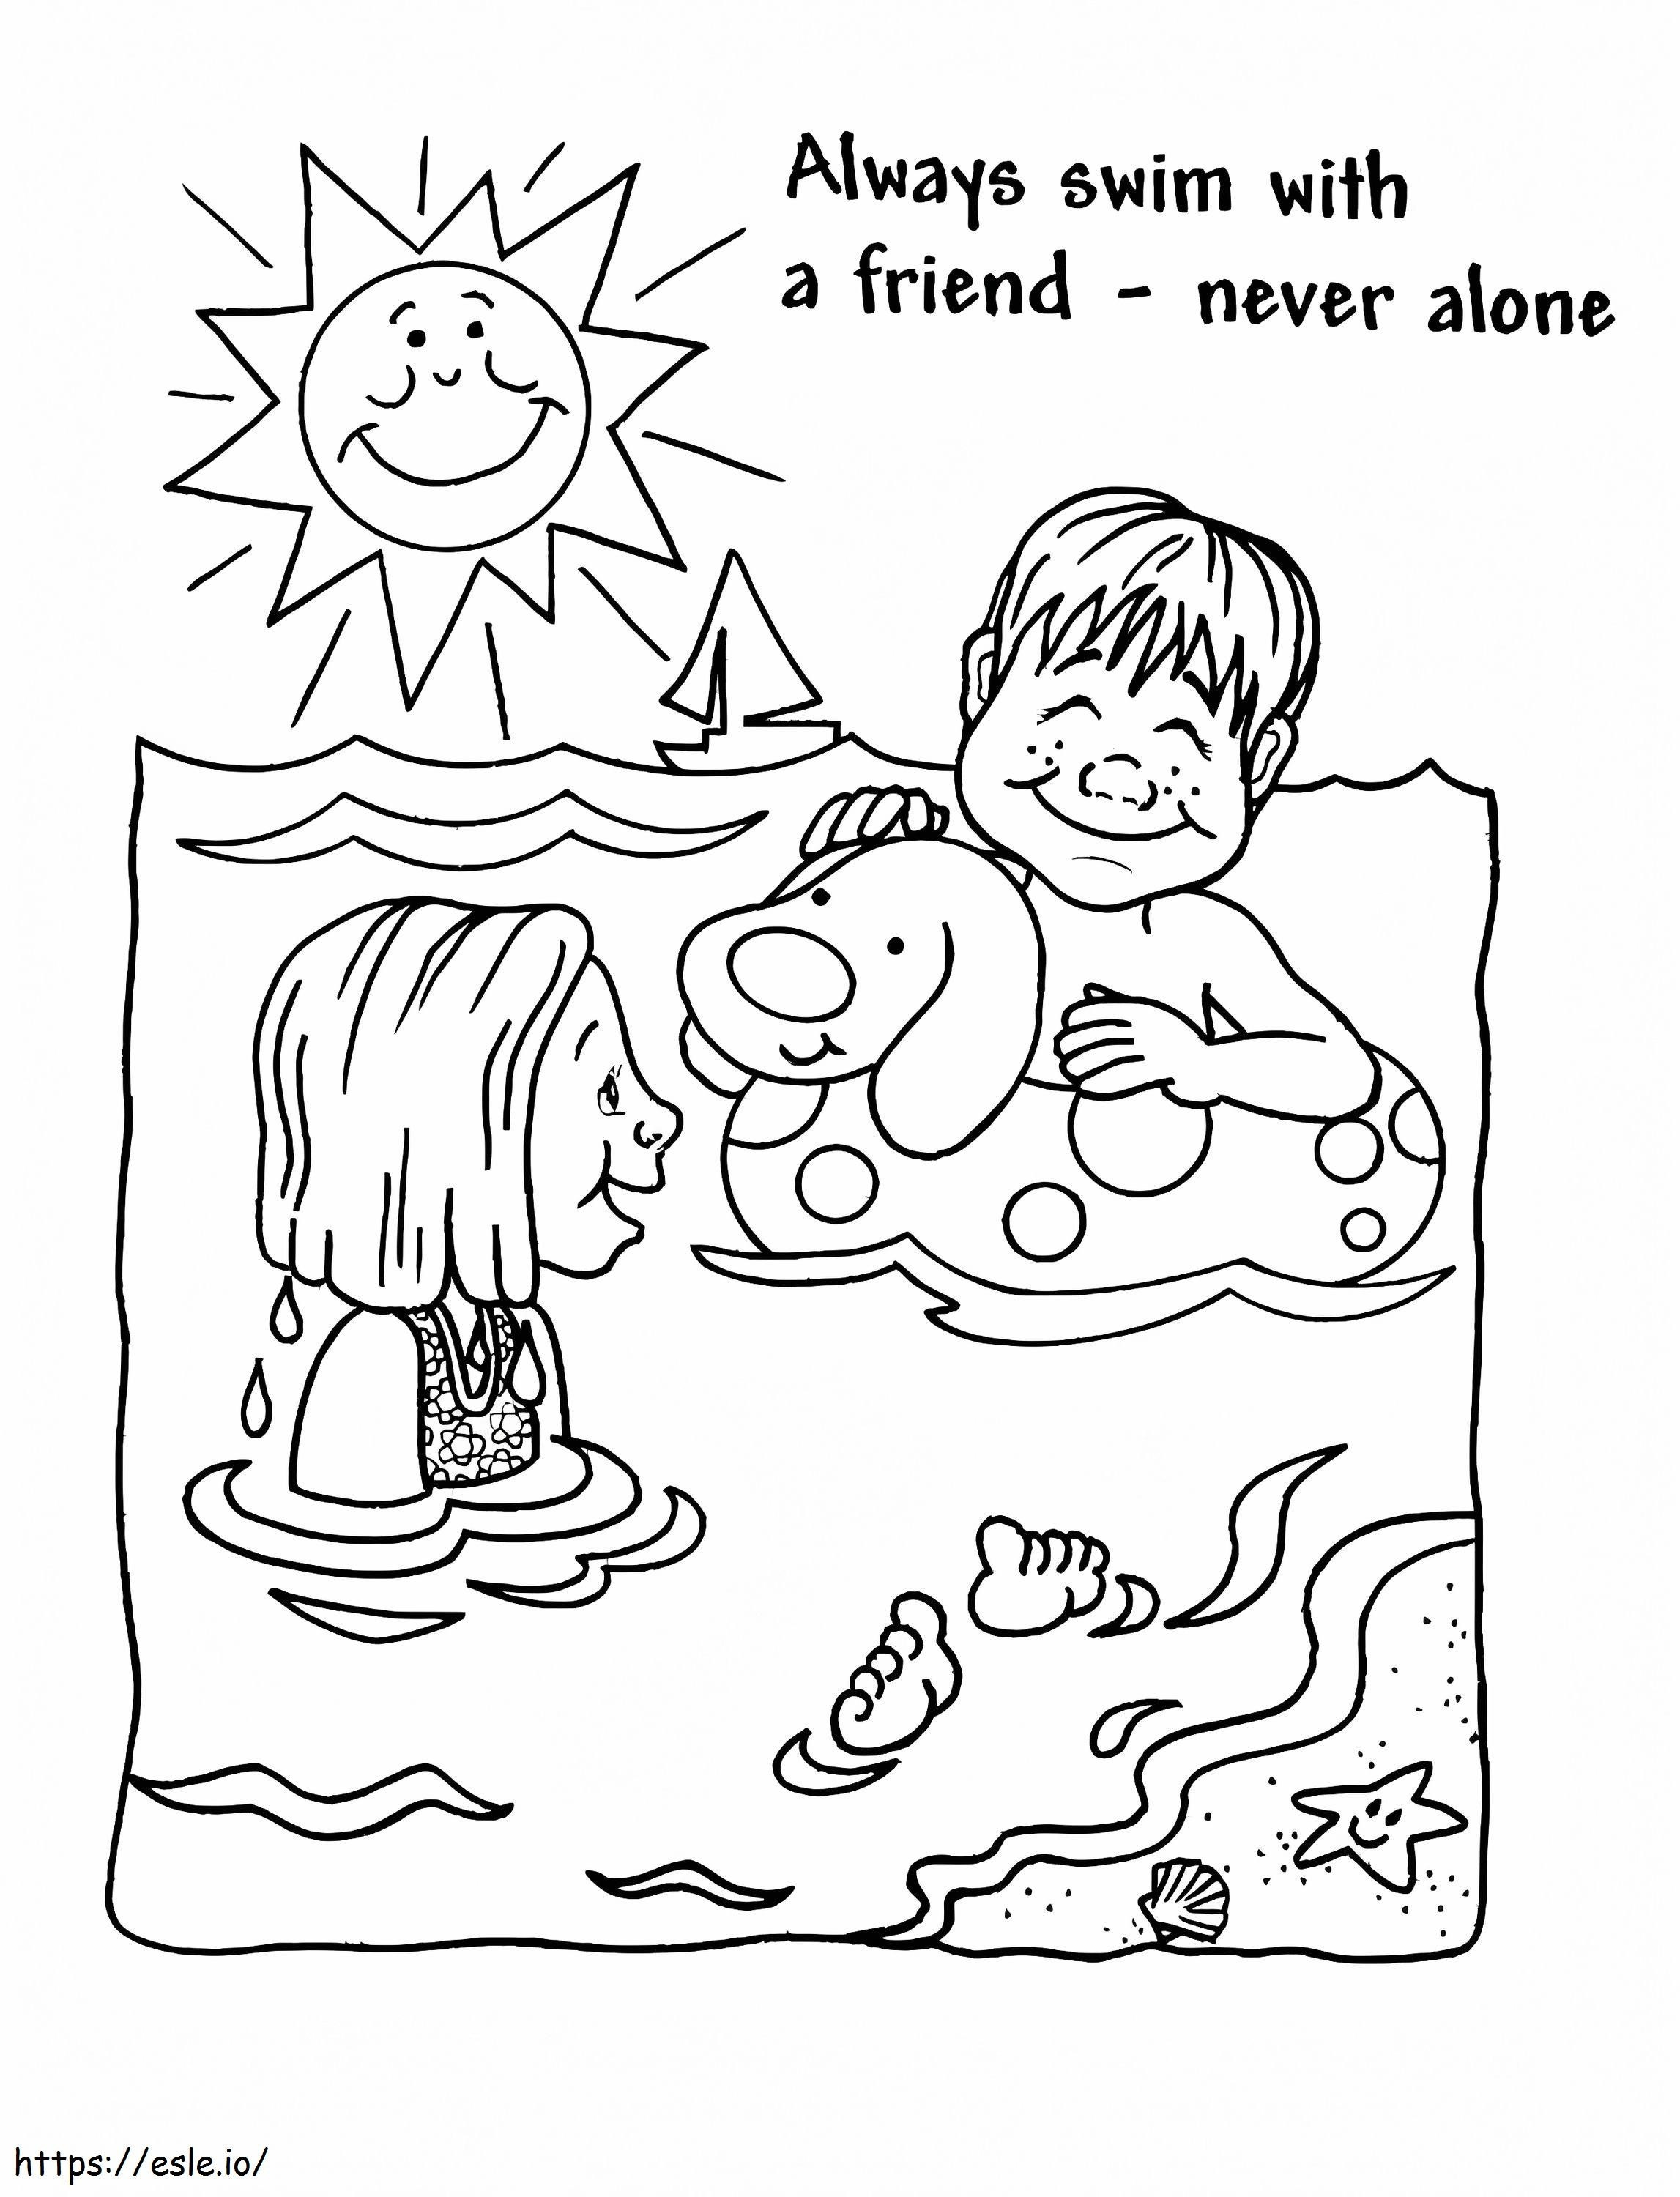 Swim Safety coloring page